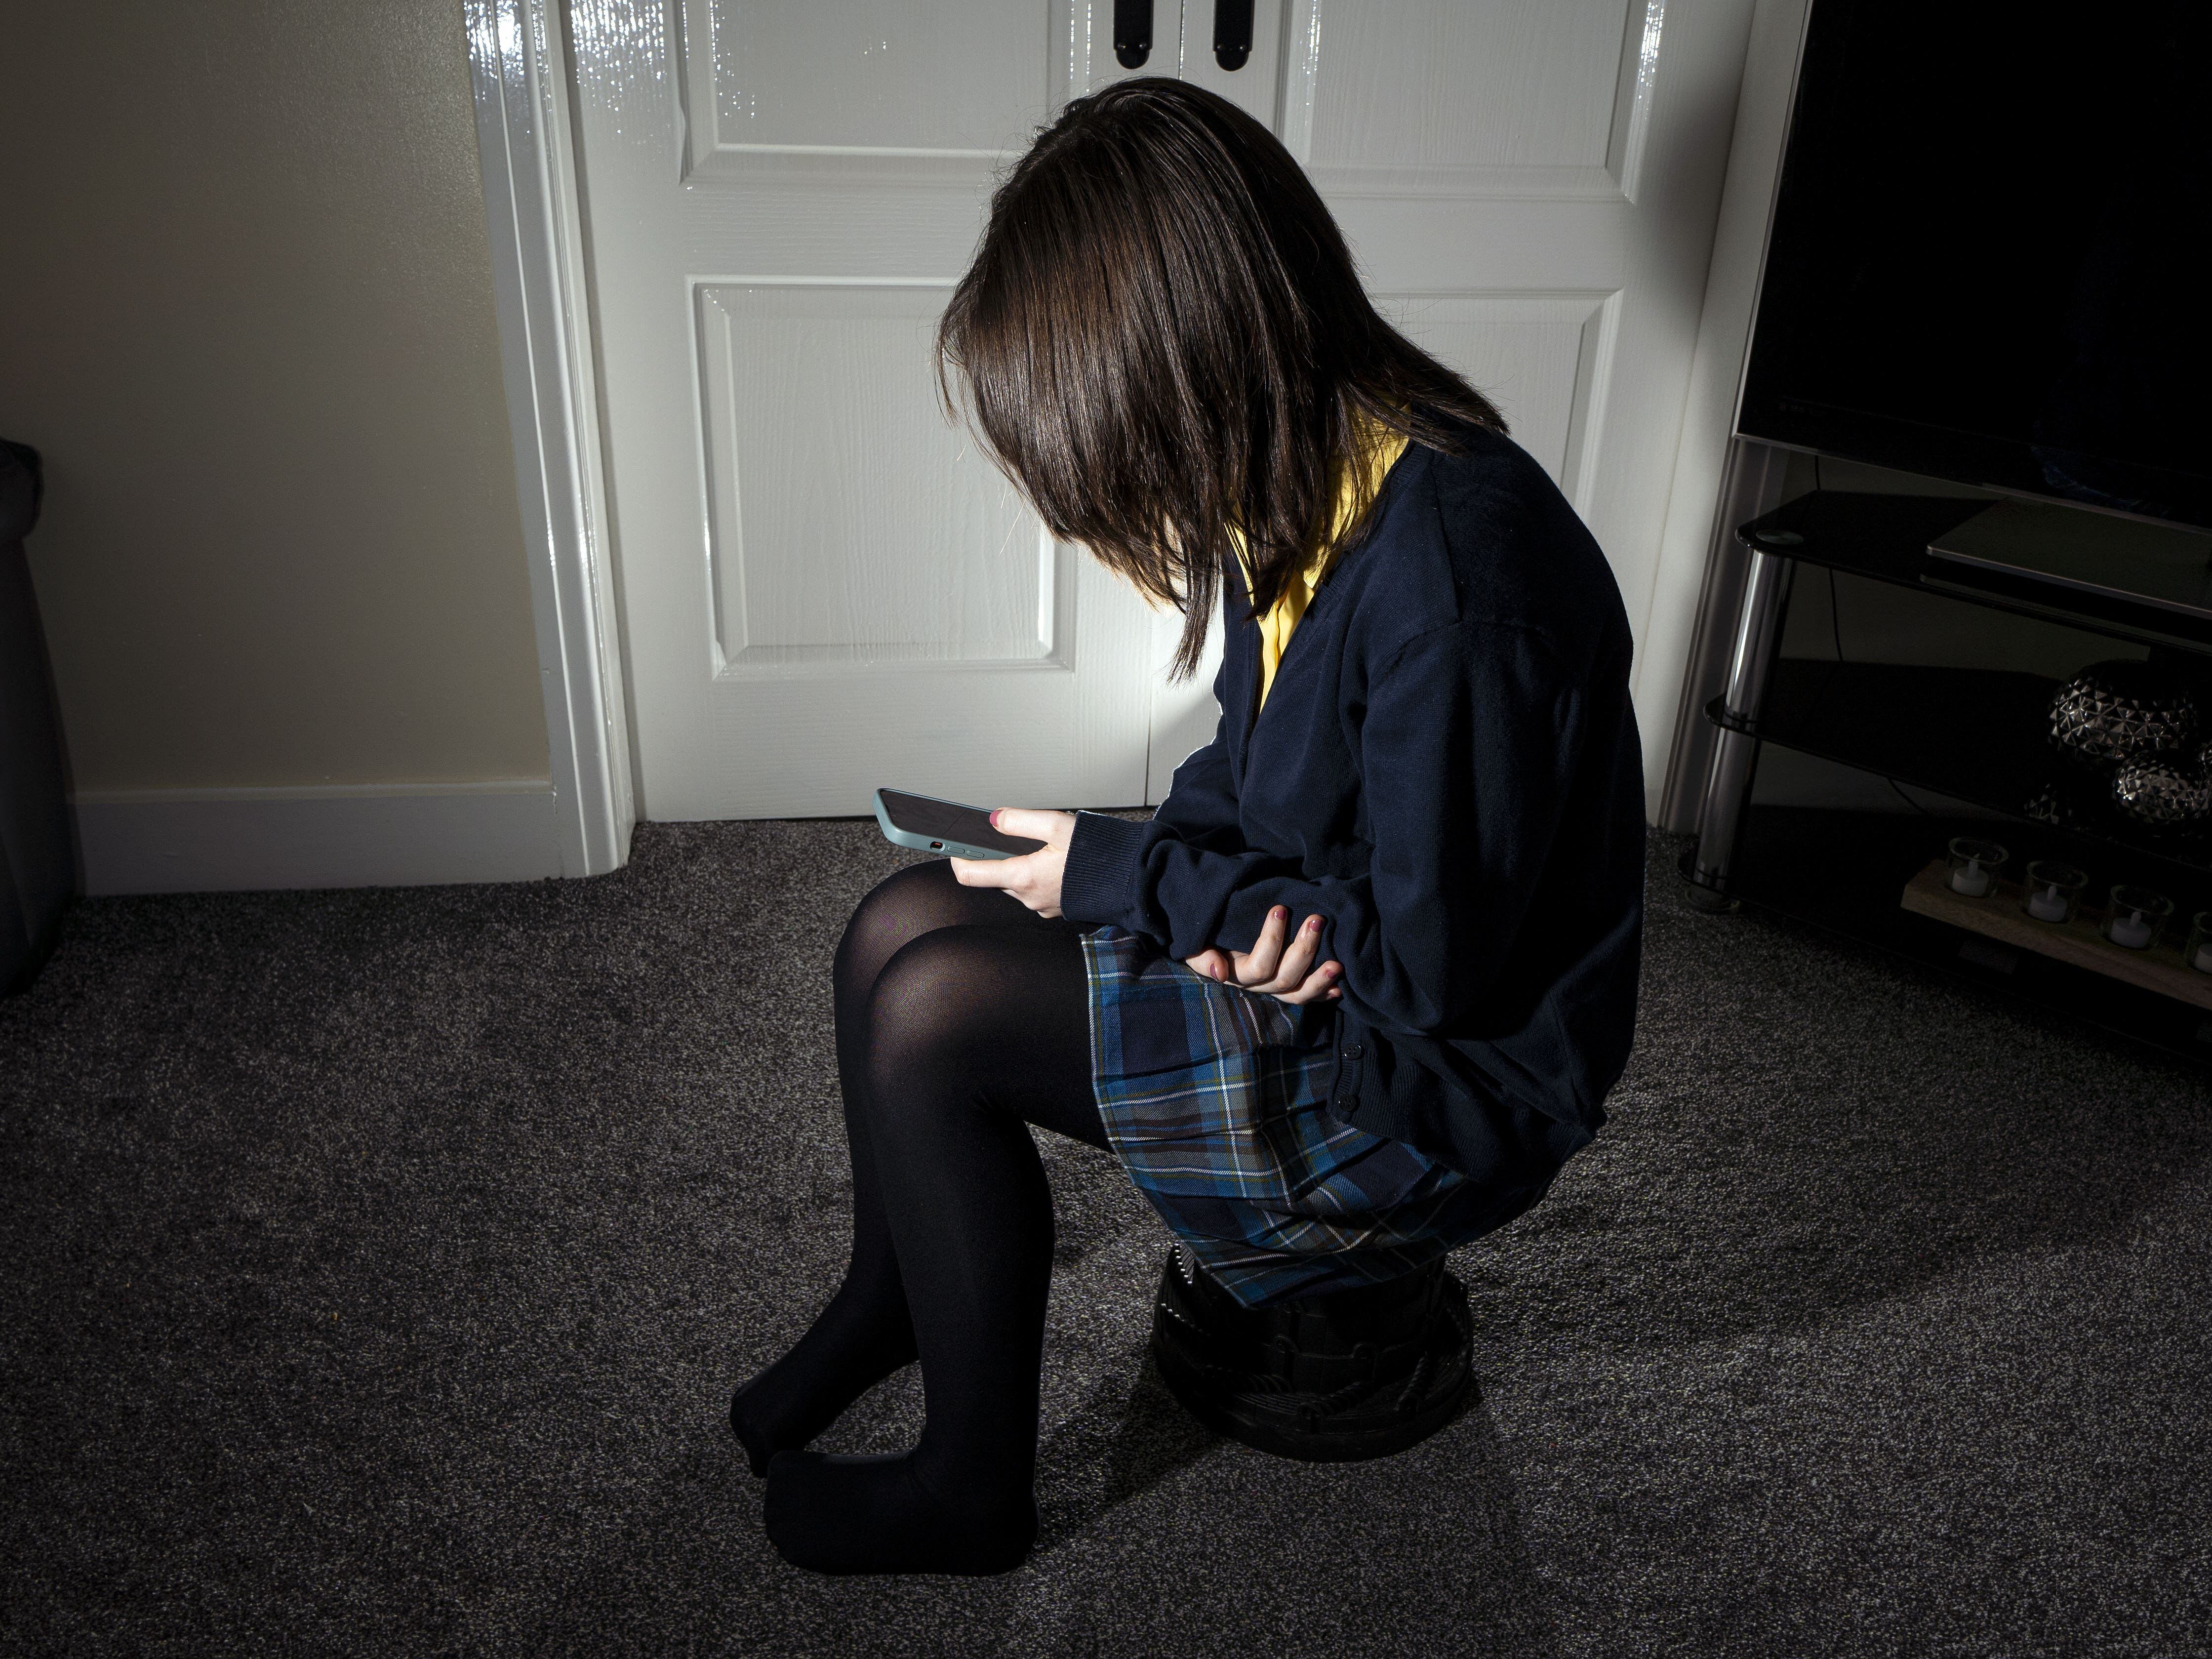 Next government should consider banning phones for under-16s, report says